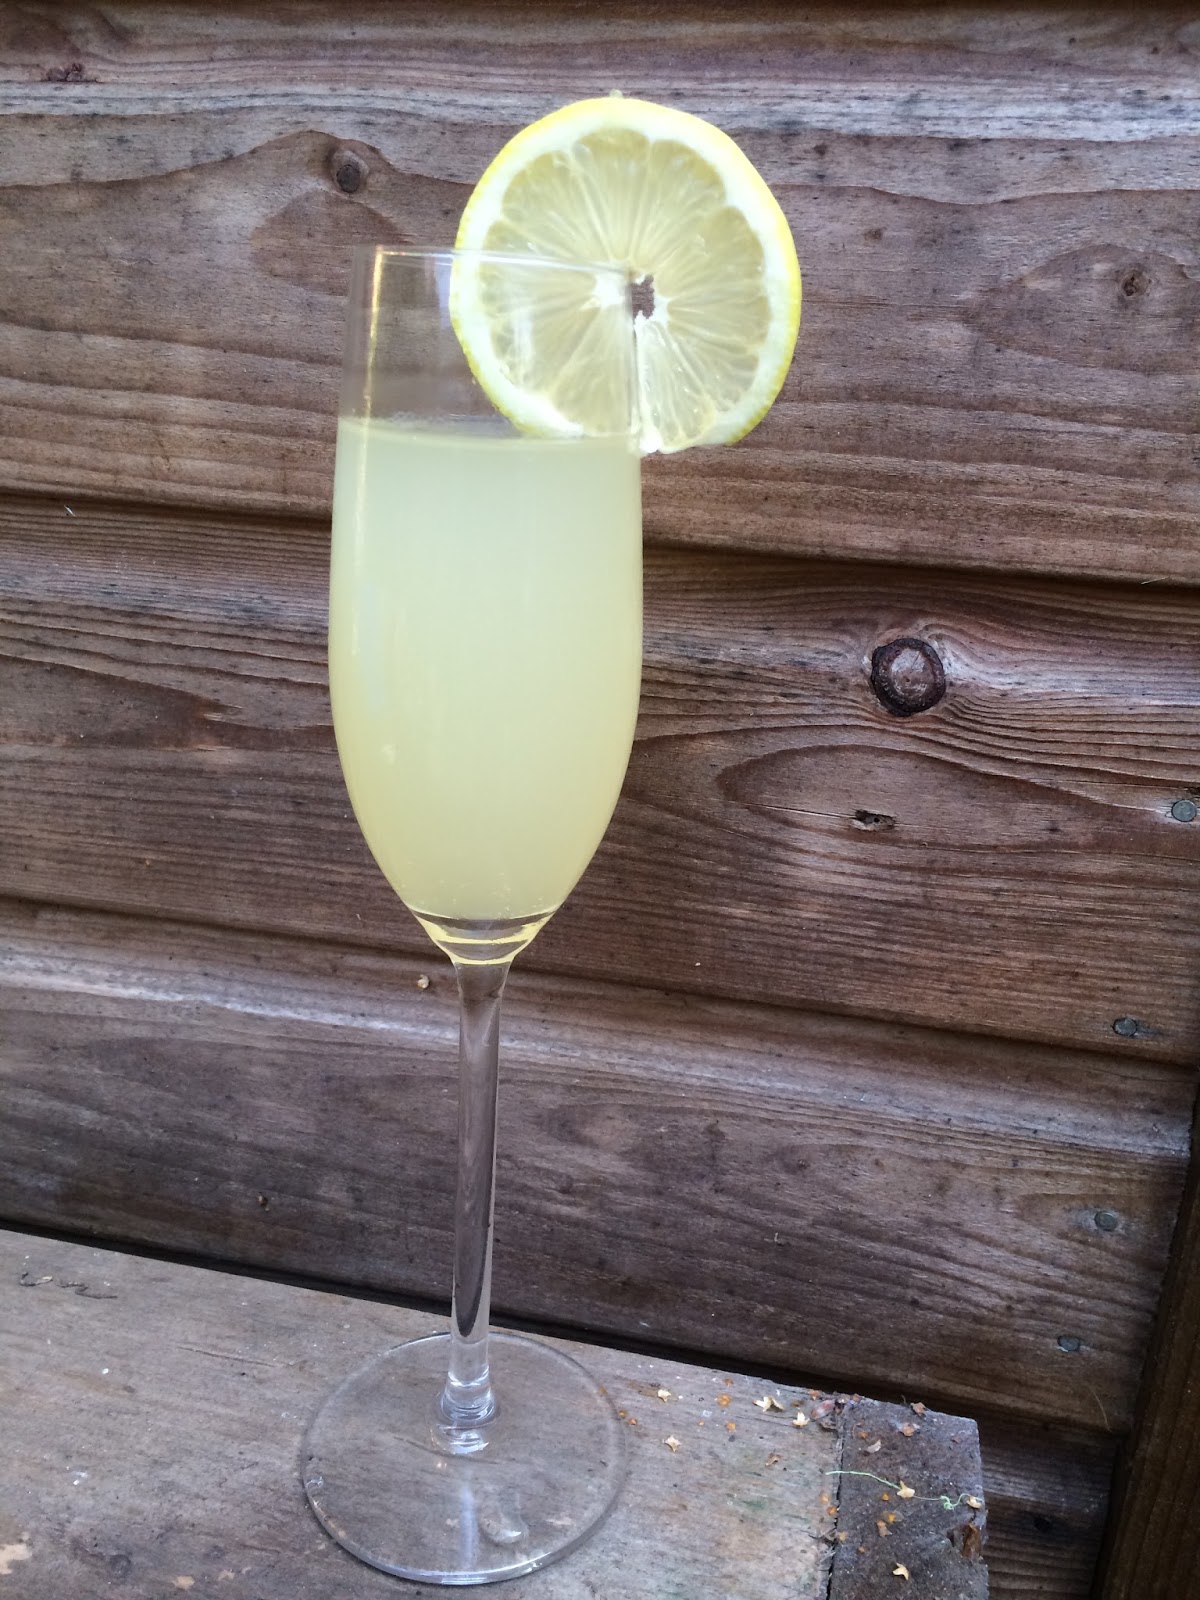 Life and Lizzy♡: Limoncello prosecco cocktail